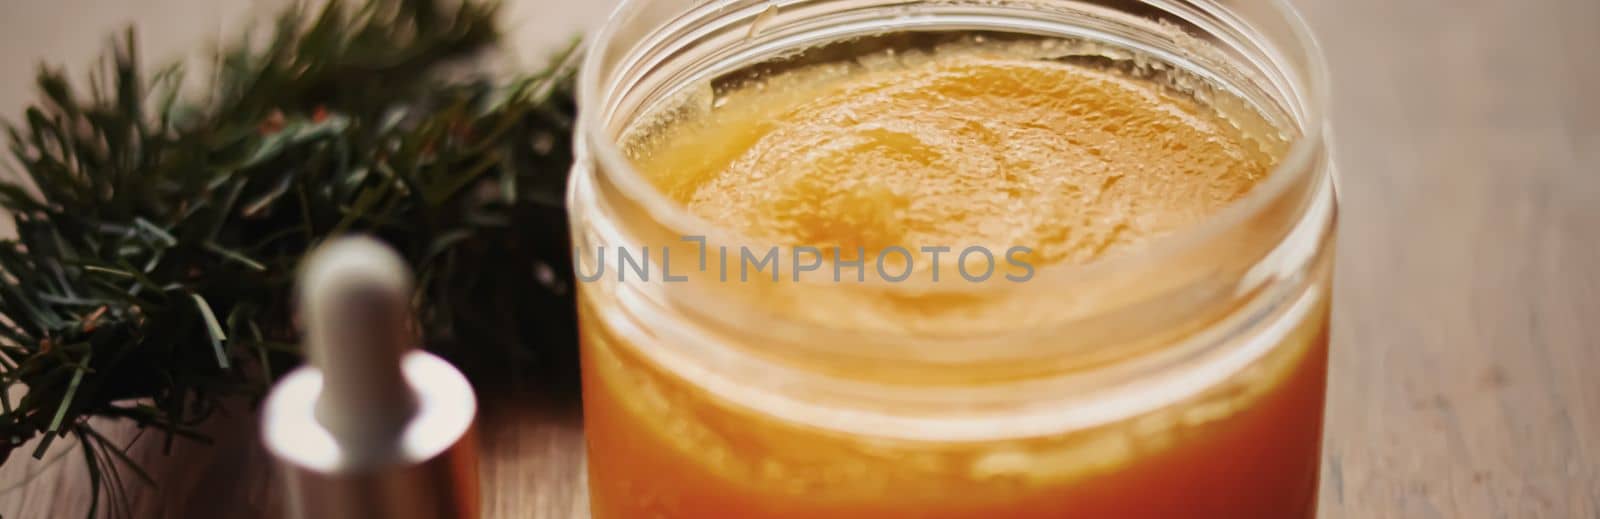 Citrus and honey orange body scrub jar on rustic wood background, beauty cosmetic and skincare product.